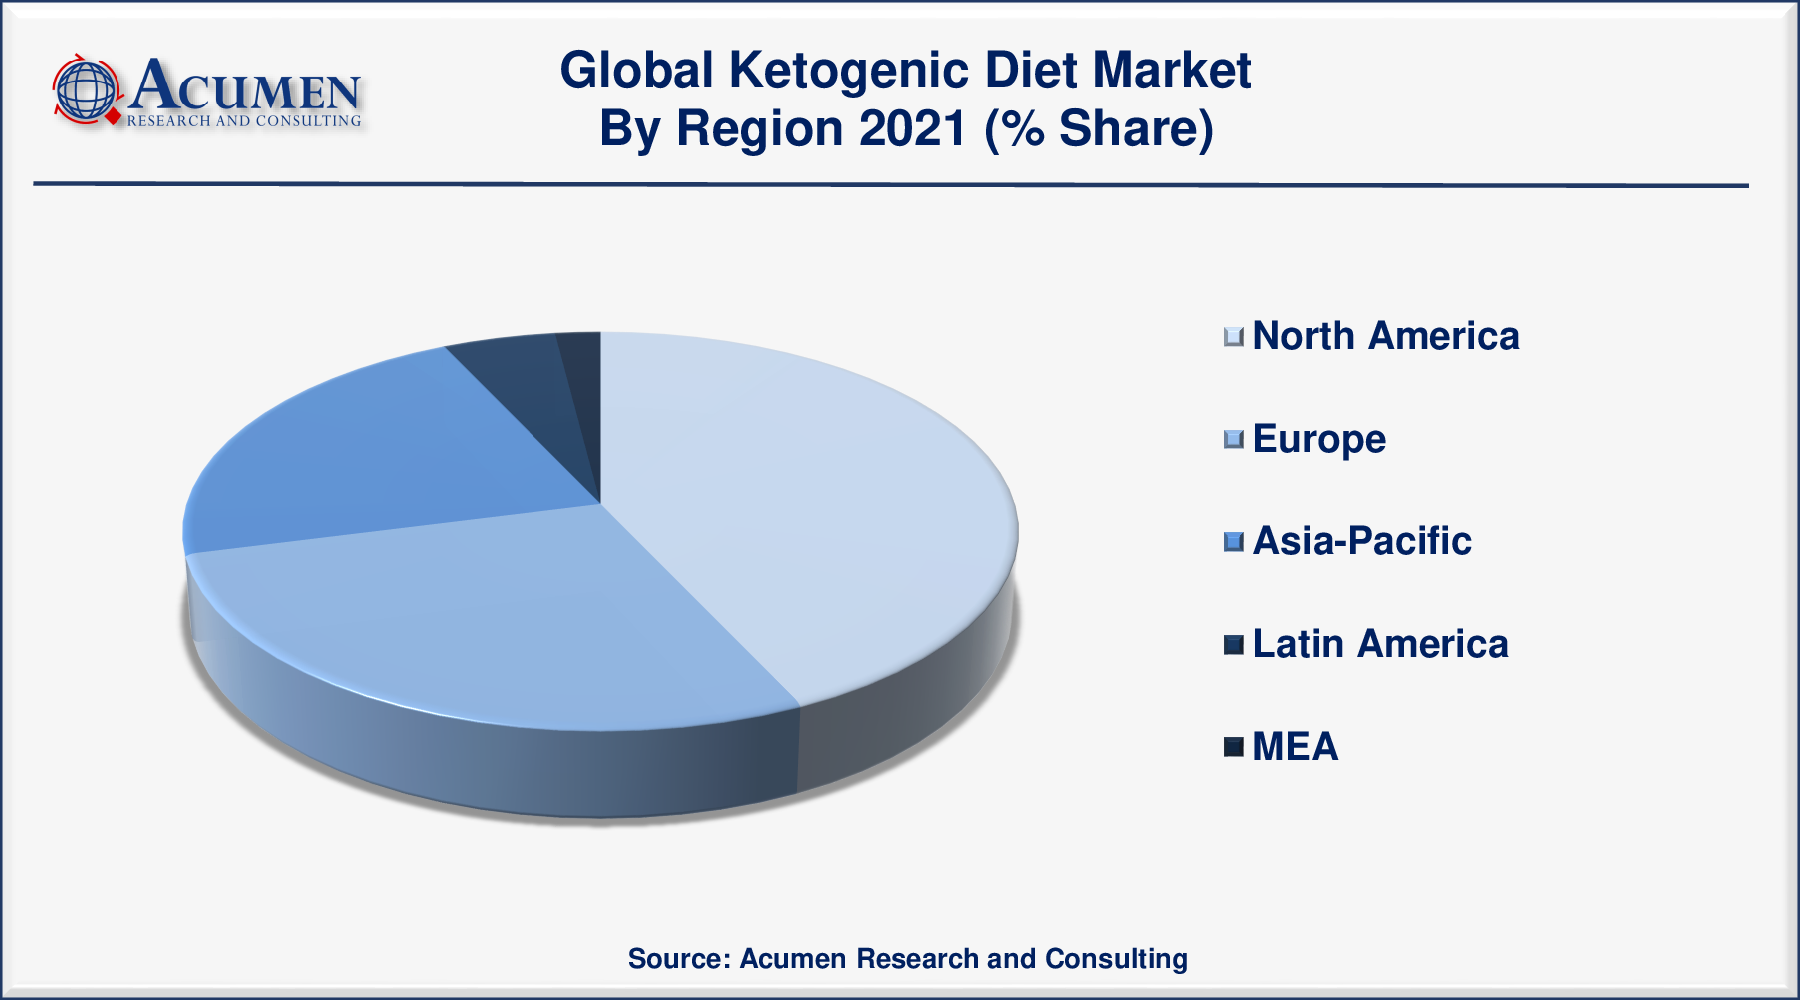 Ketogenic Diet Market Analysis was valued at USD 10,198 Million in 2021 and is predicted to be worth USD 16,064 Million by 2030, with a CAGR of 5.4% from 2022 to 2030.